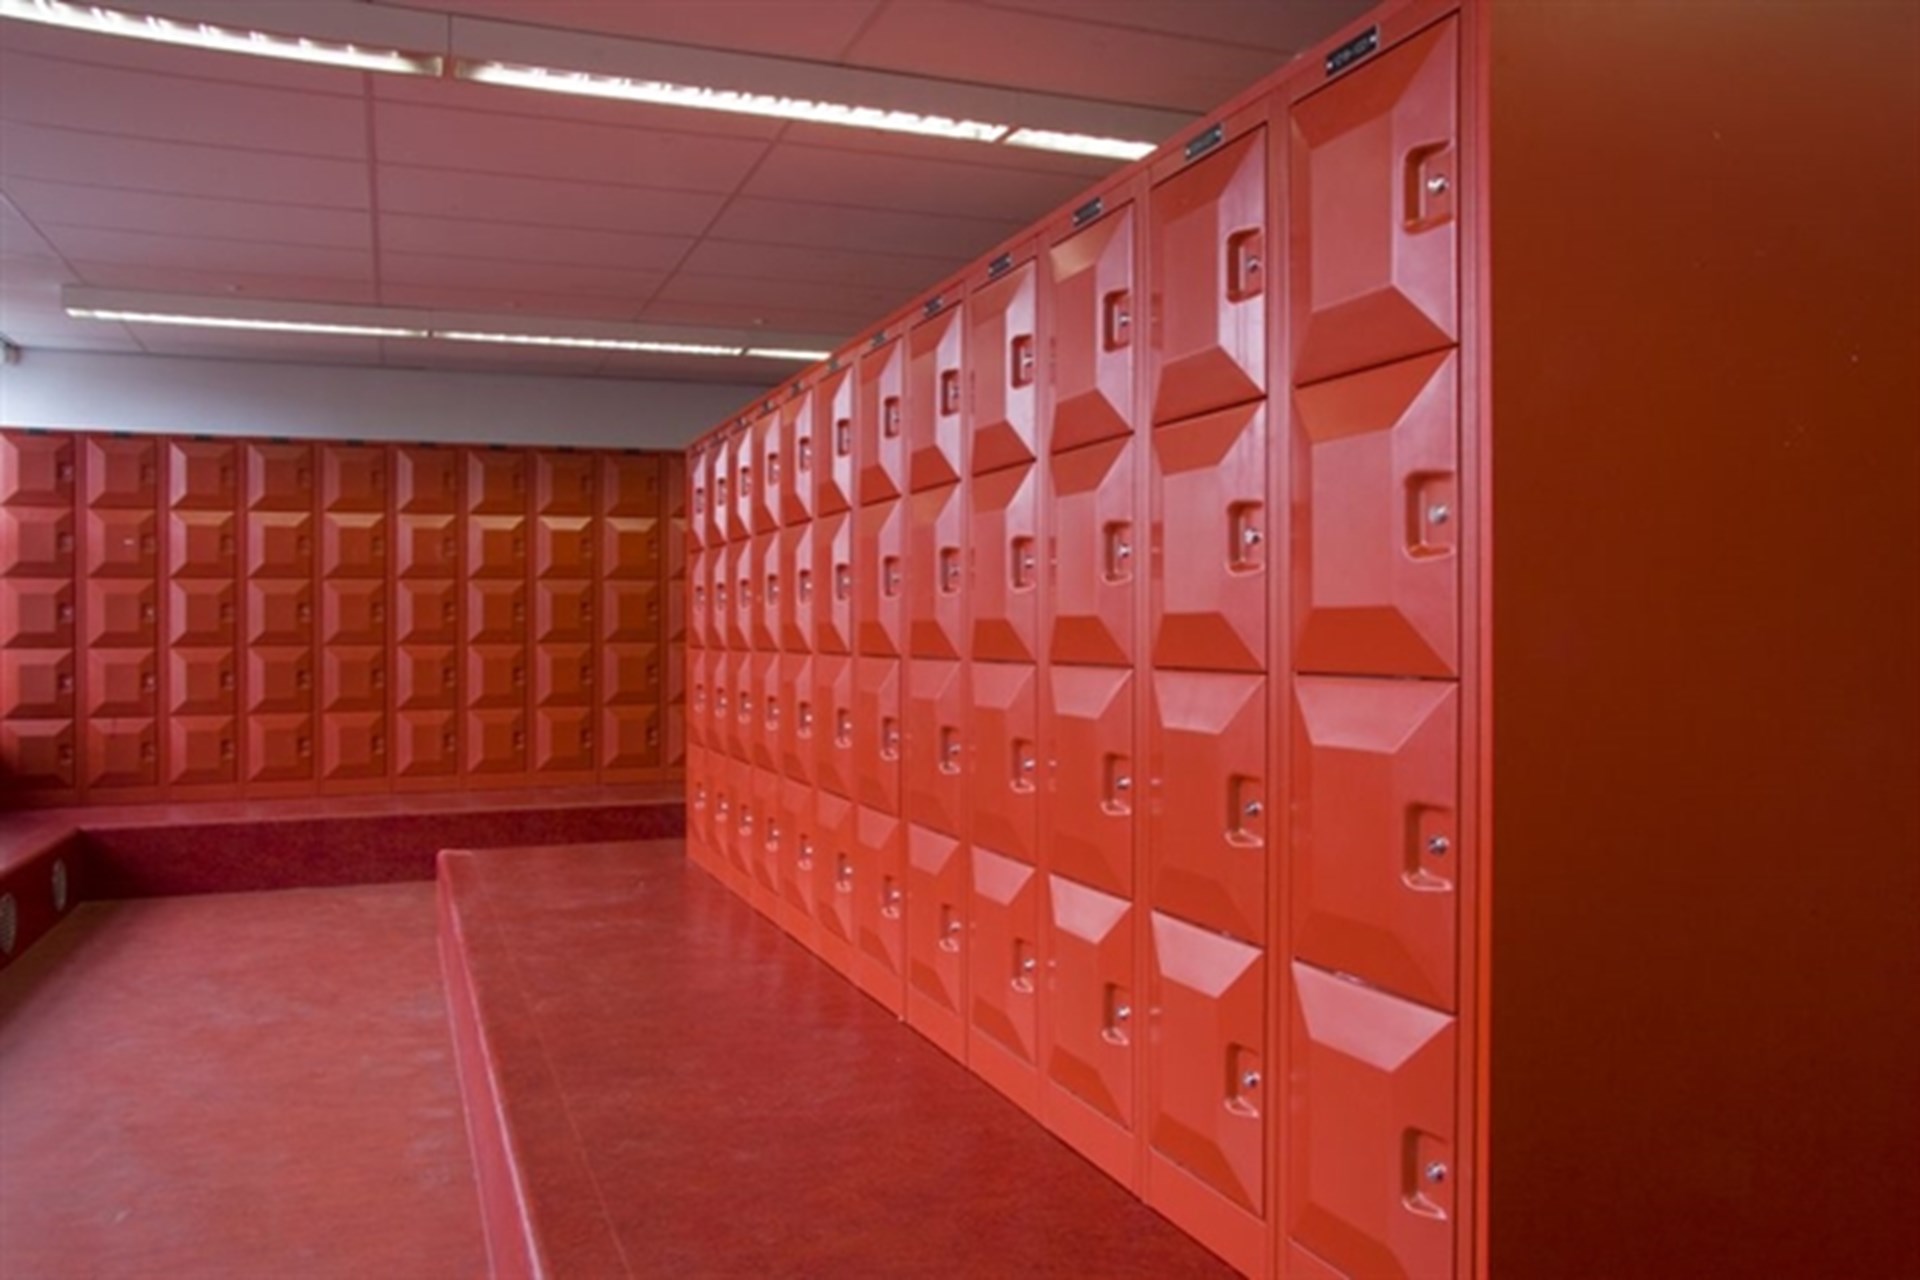 Example of the P model compartment locker